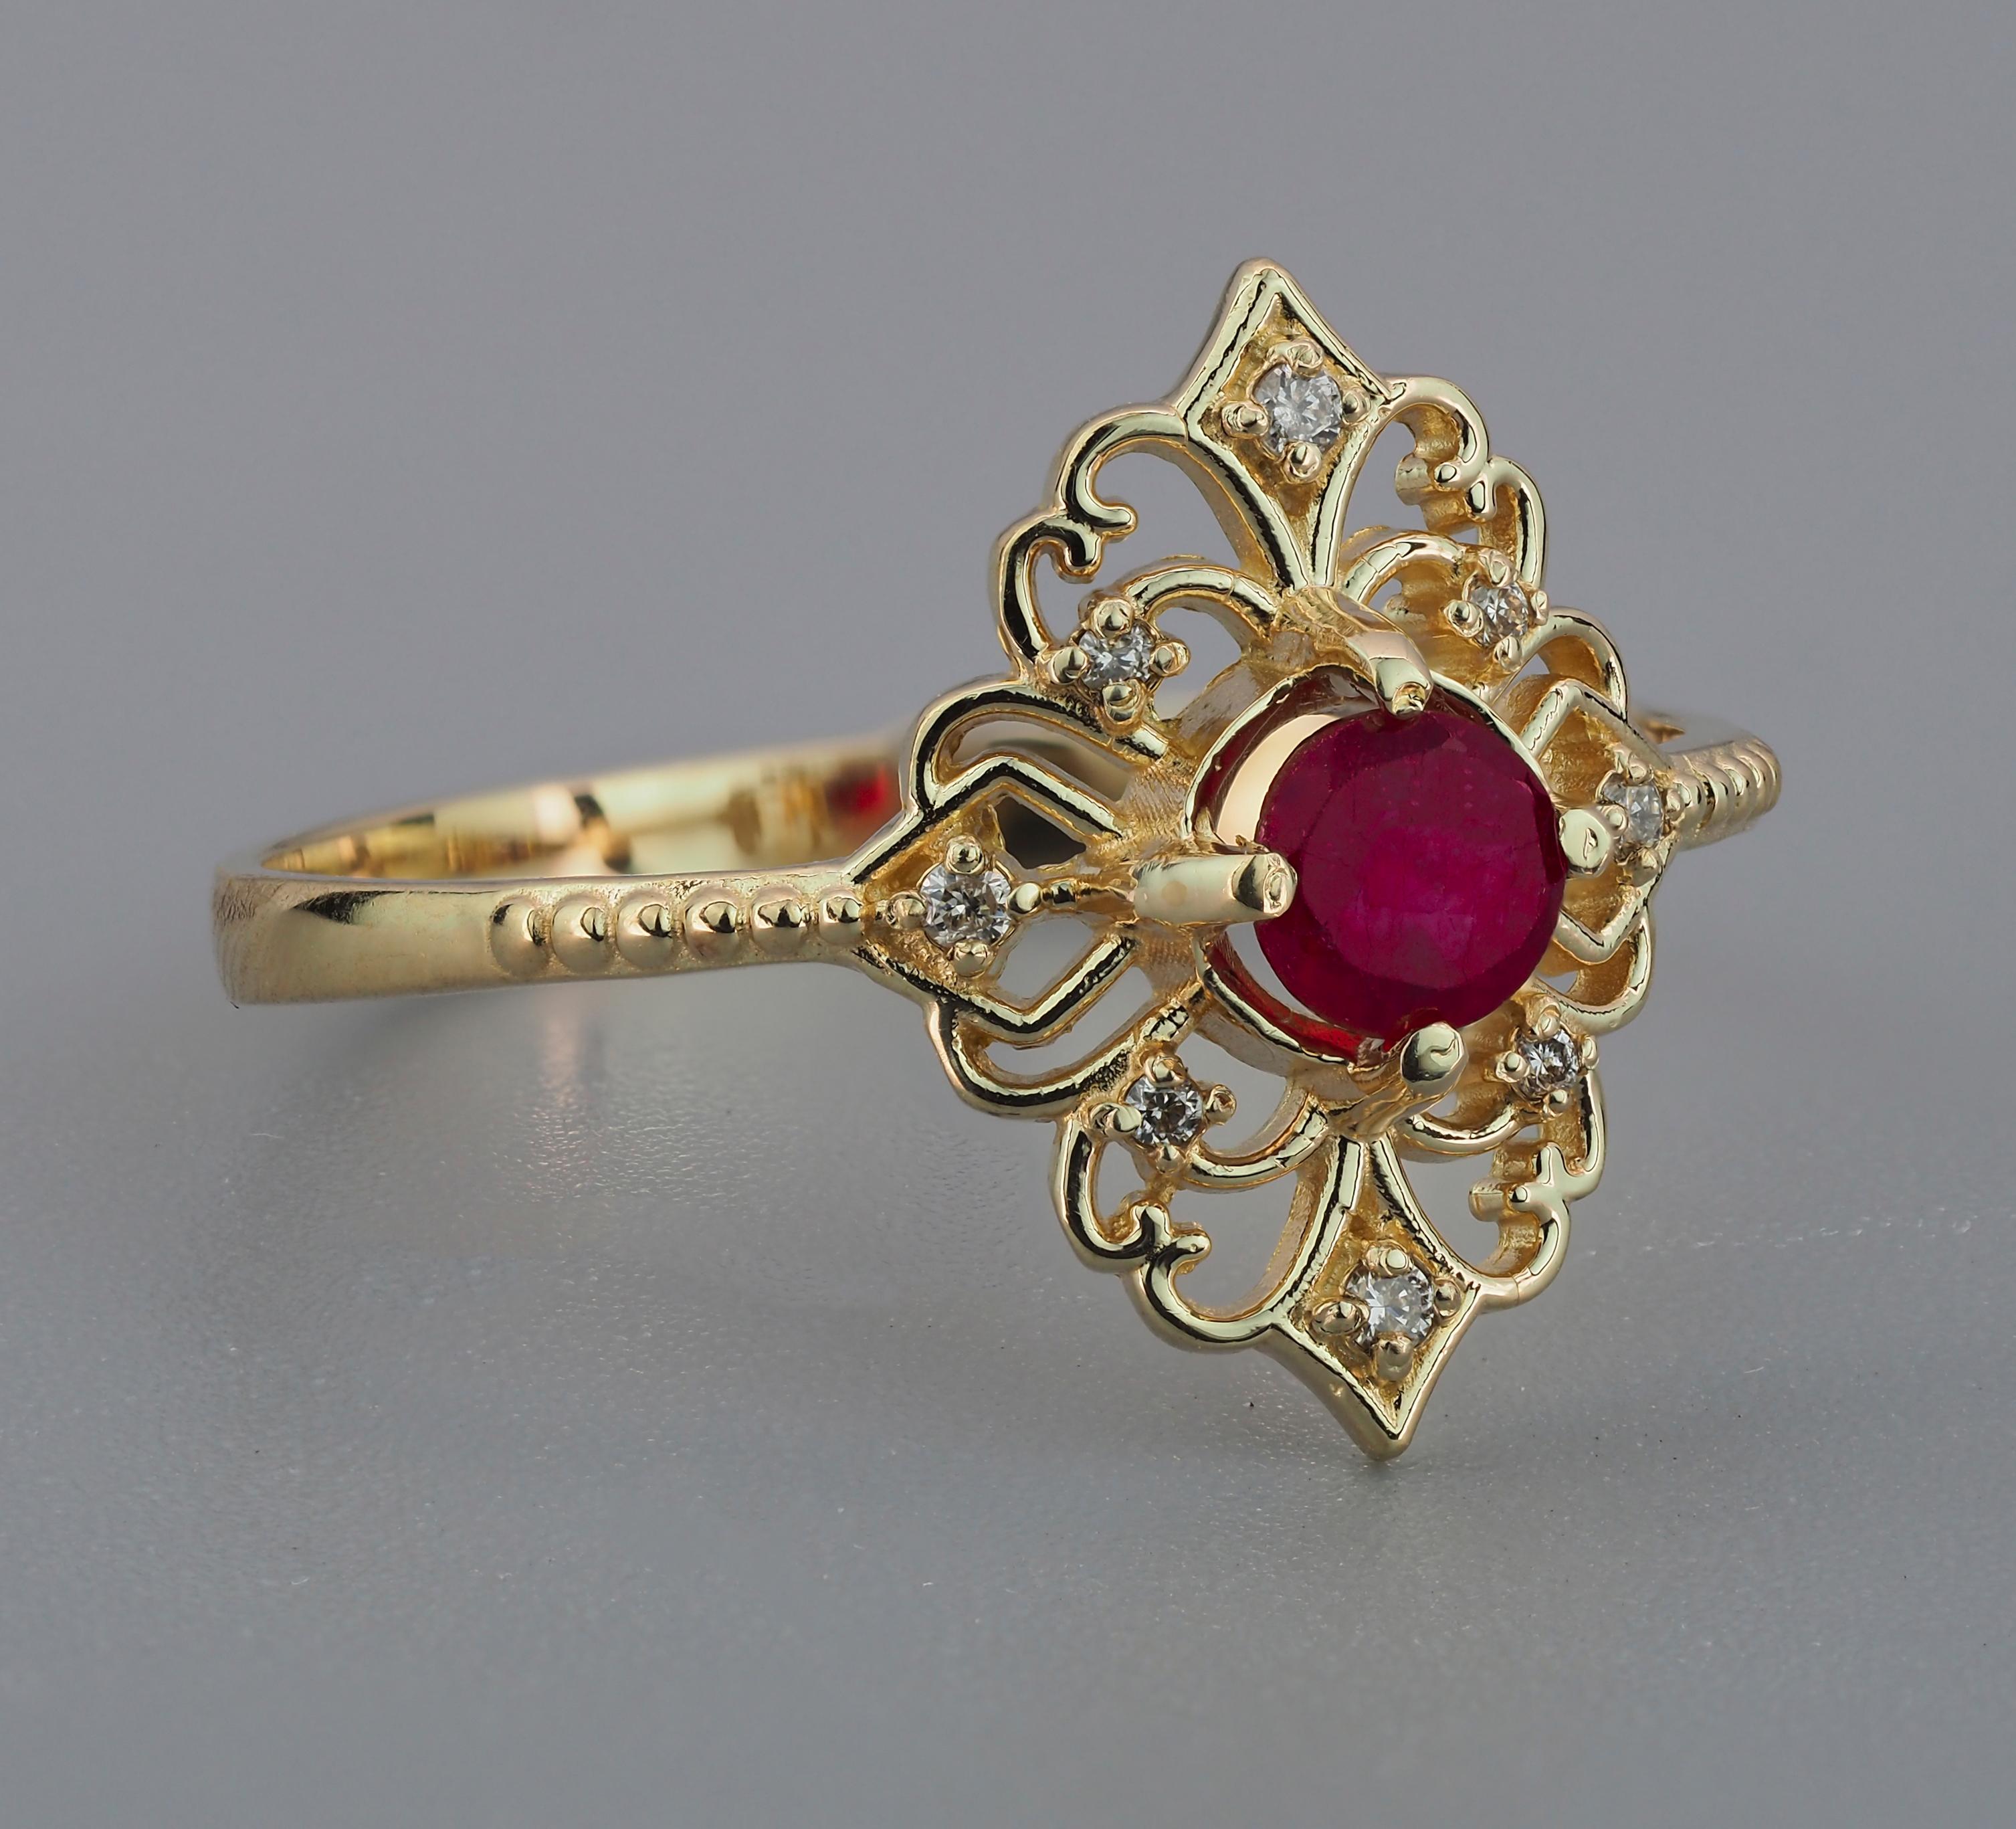 For Sale:  14 karat Gold Ring with Ruby and Diamonds. Vintage style ruby ring 2